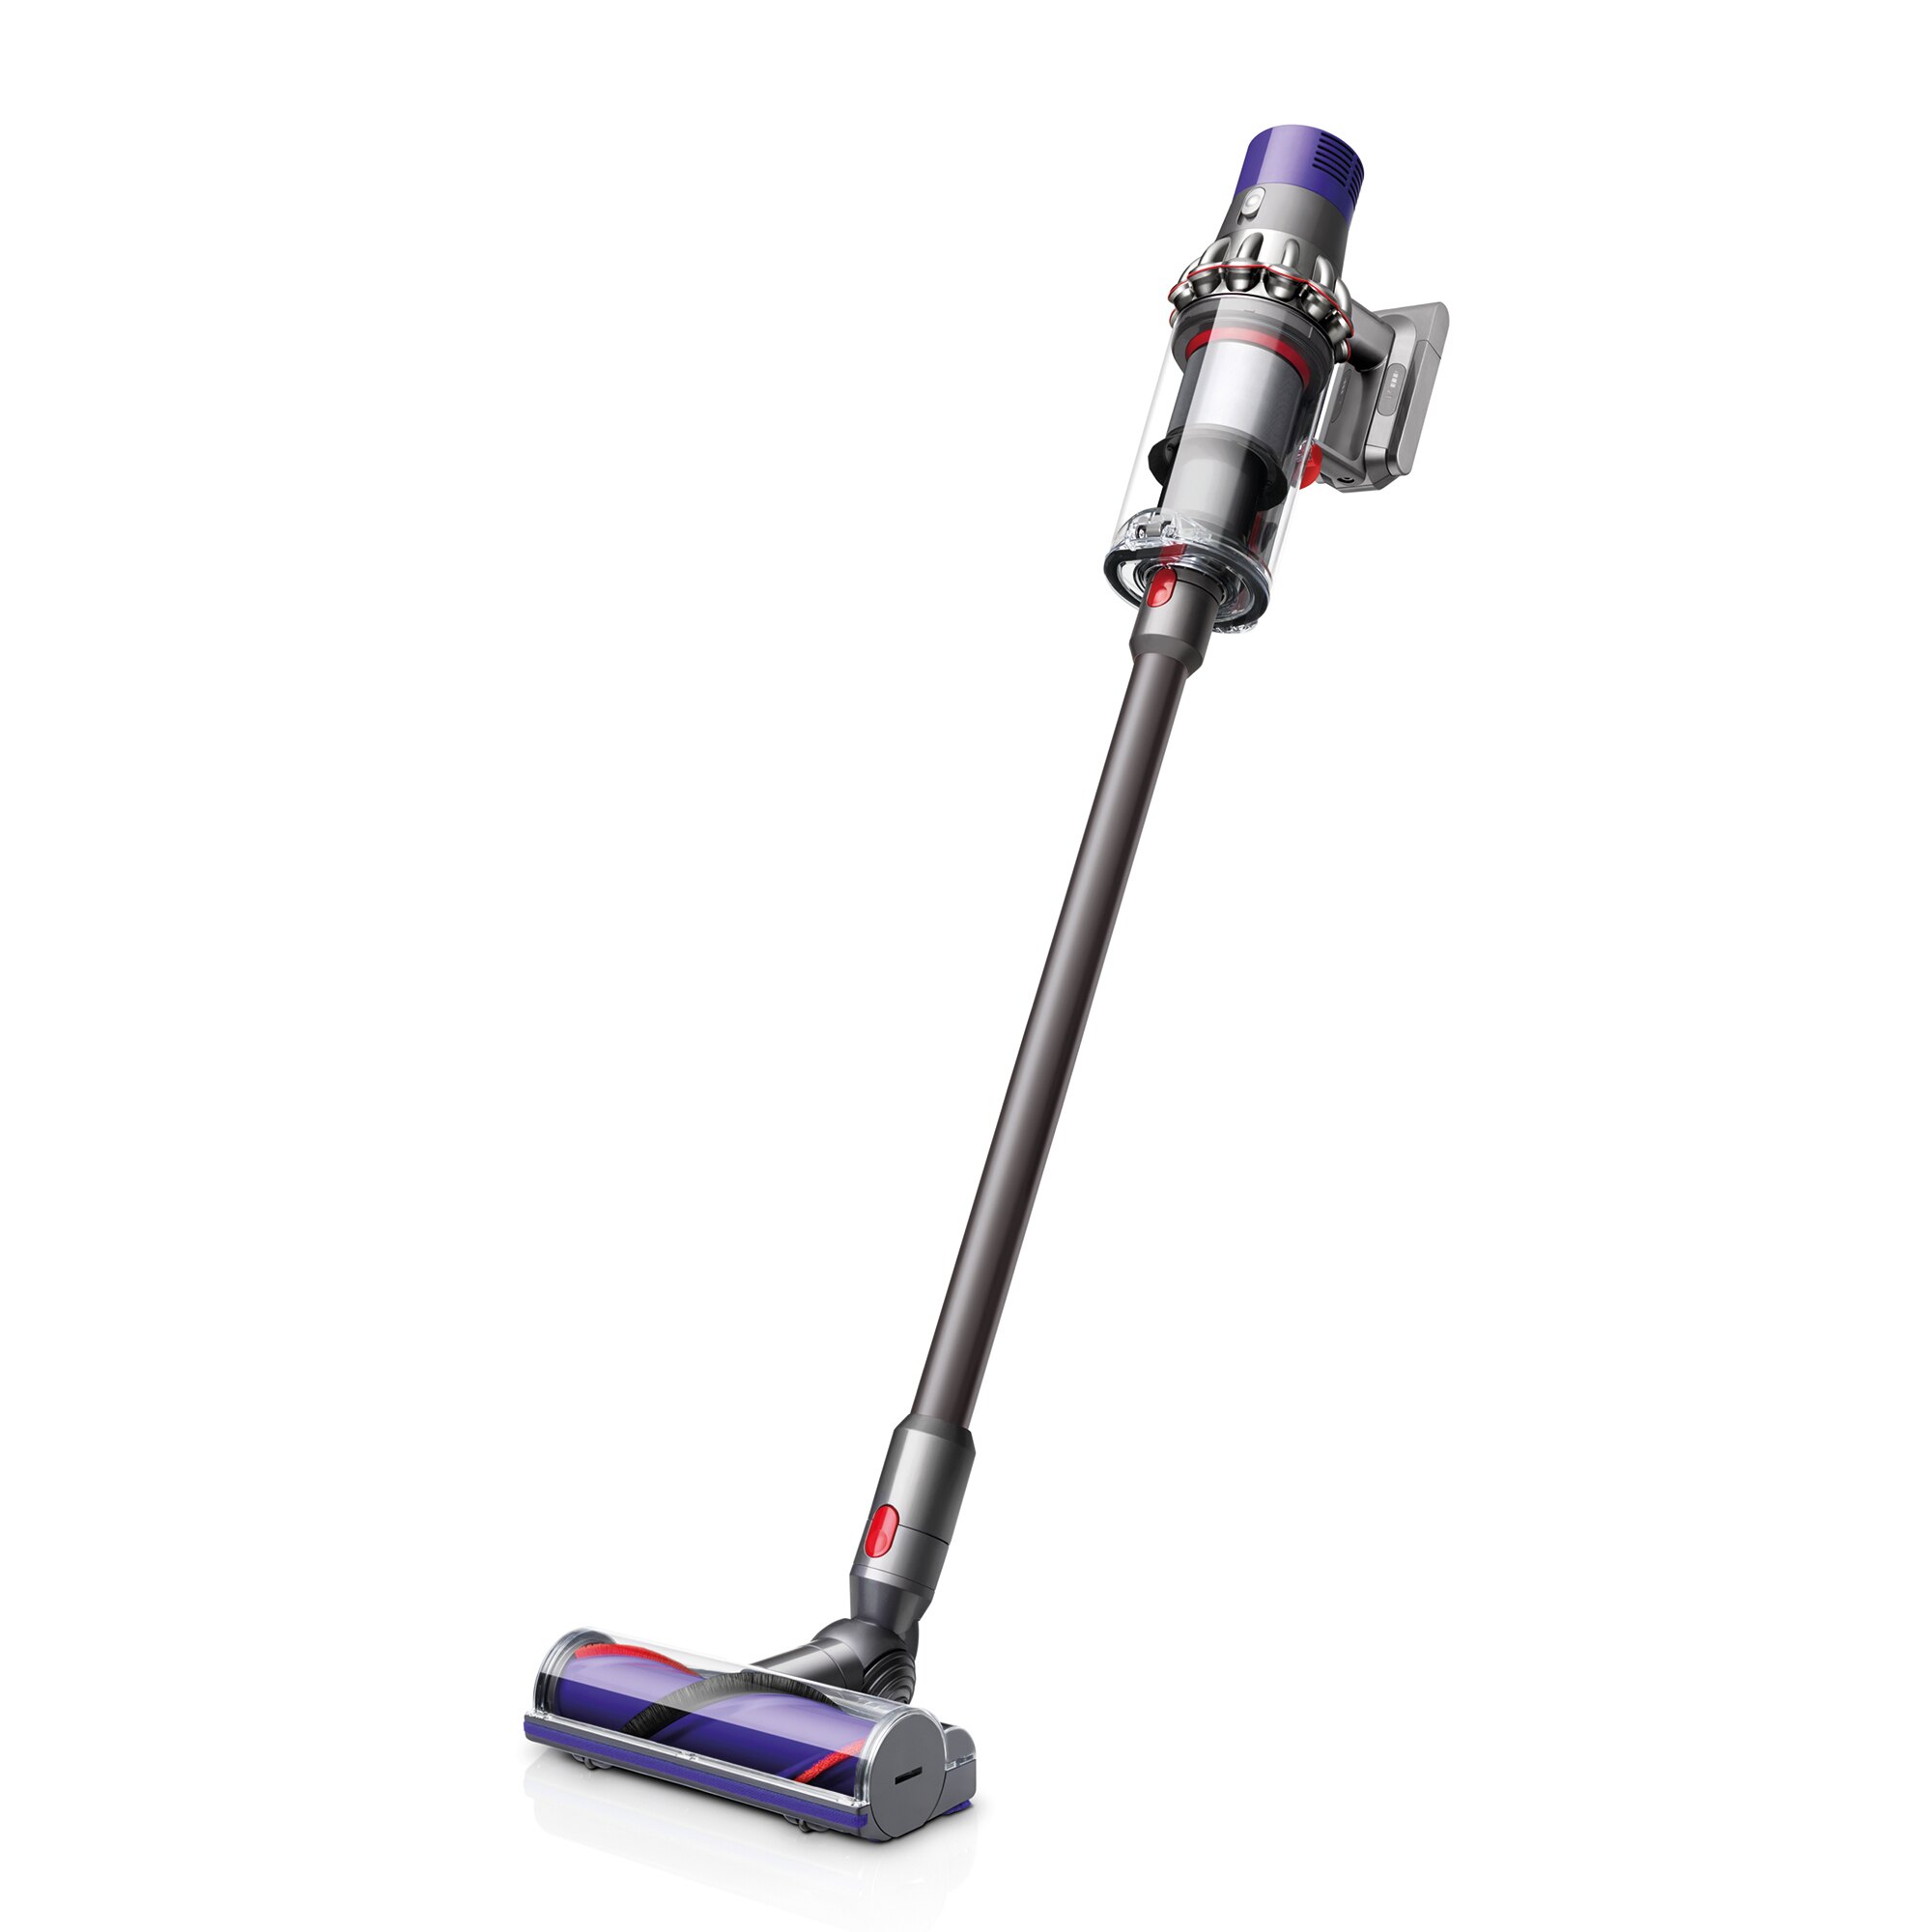 Dyson V10 Total Clean Cordfree Vacuum Cleaner| Iron | Refurbished $251.99